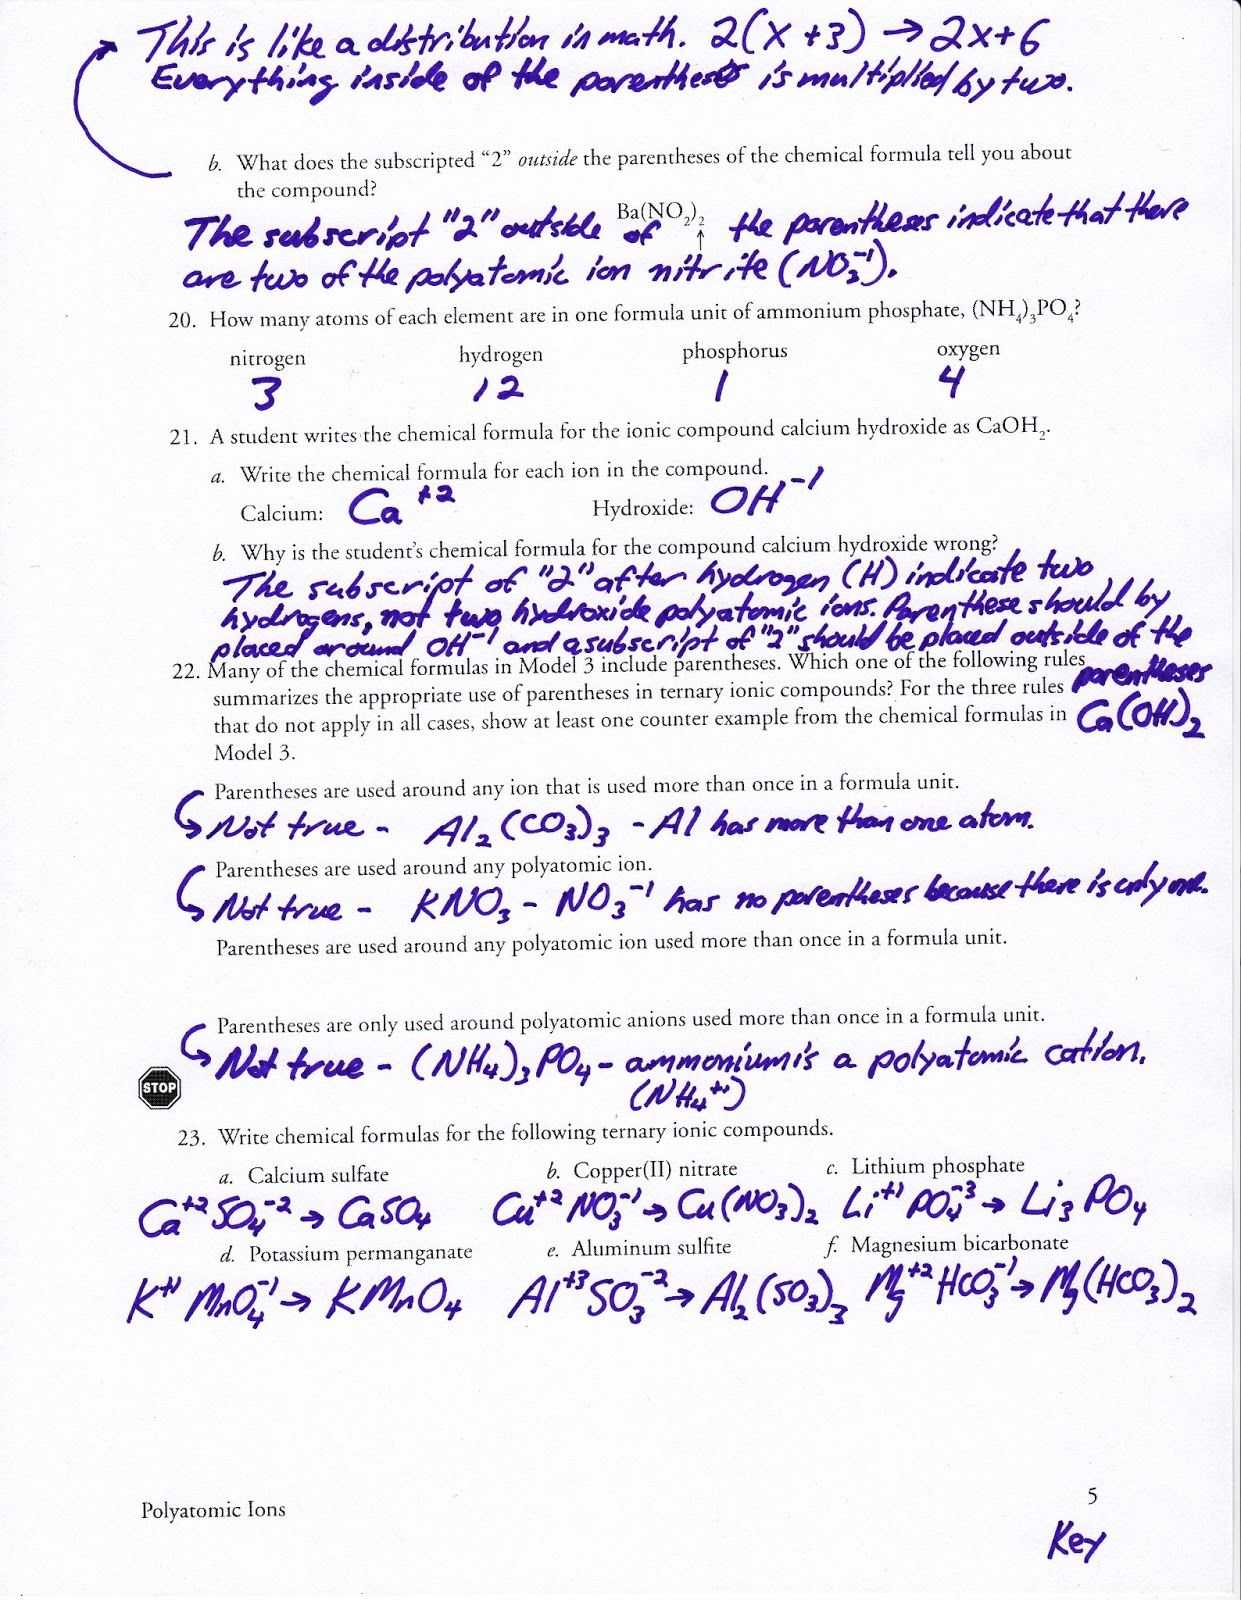 Identity theft Worksheet Answers and Polyatomic Ions Worksheet Answer Key Things to Wear